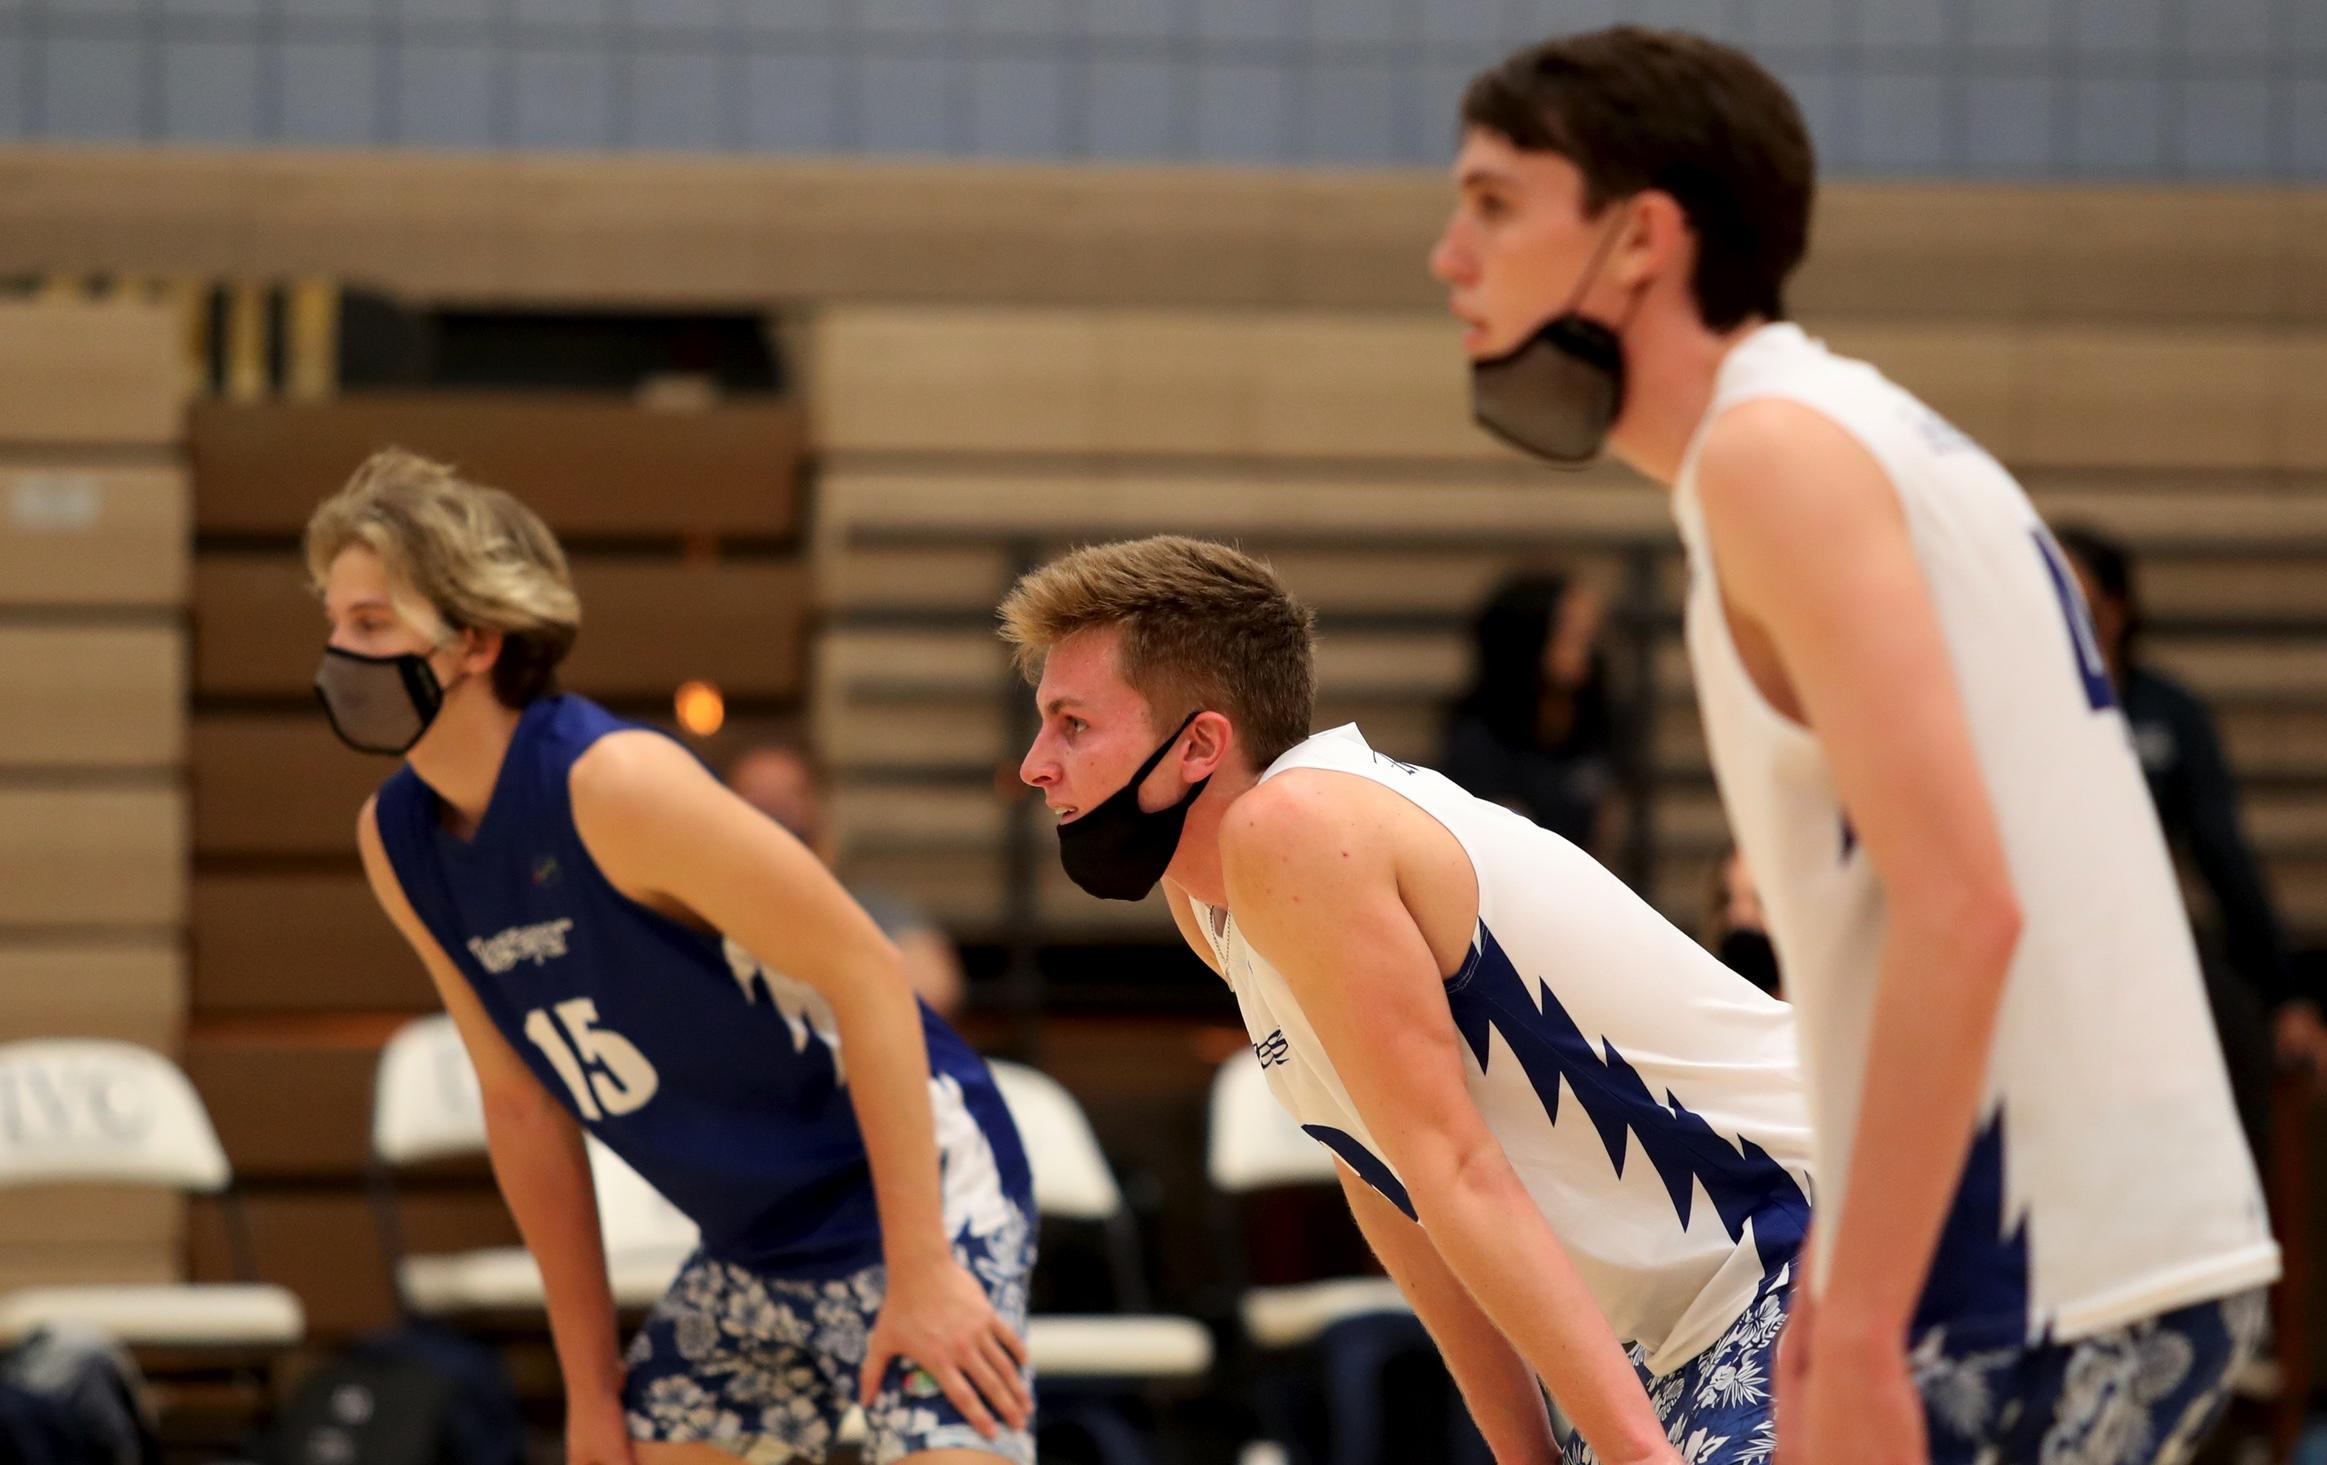 Men's volleyball team falls at OCC, will be No. 2 seed in tourney